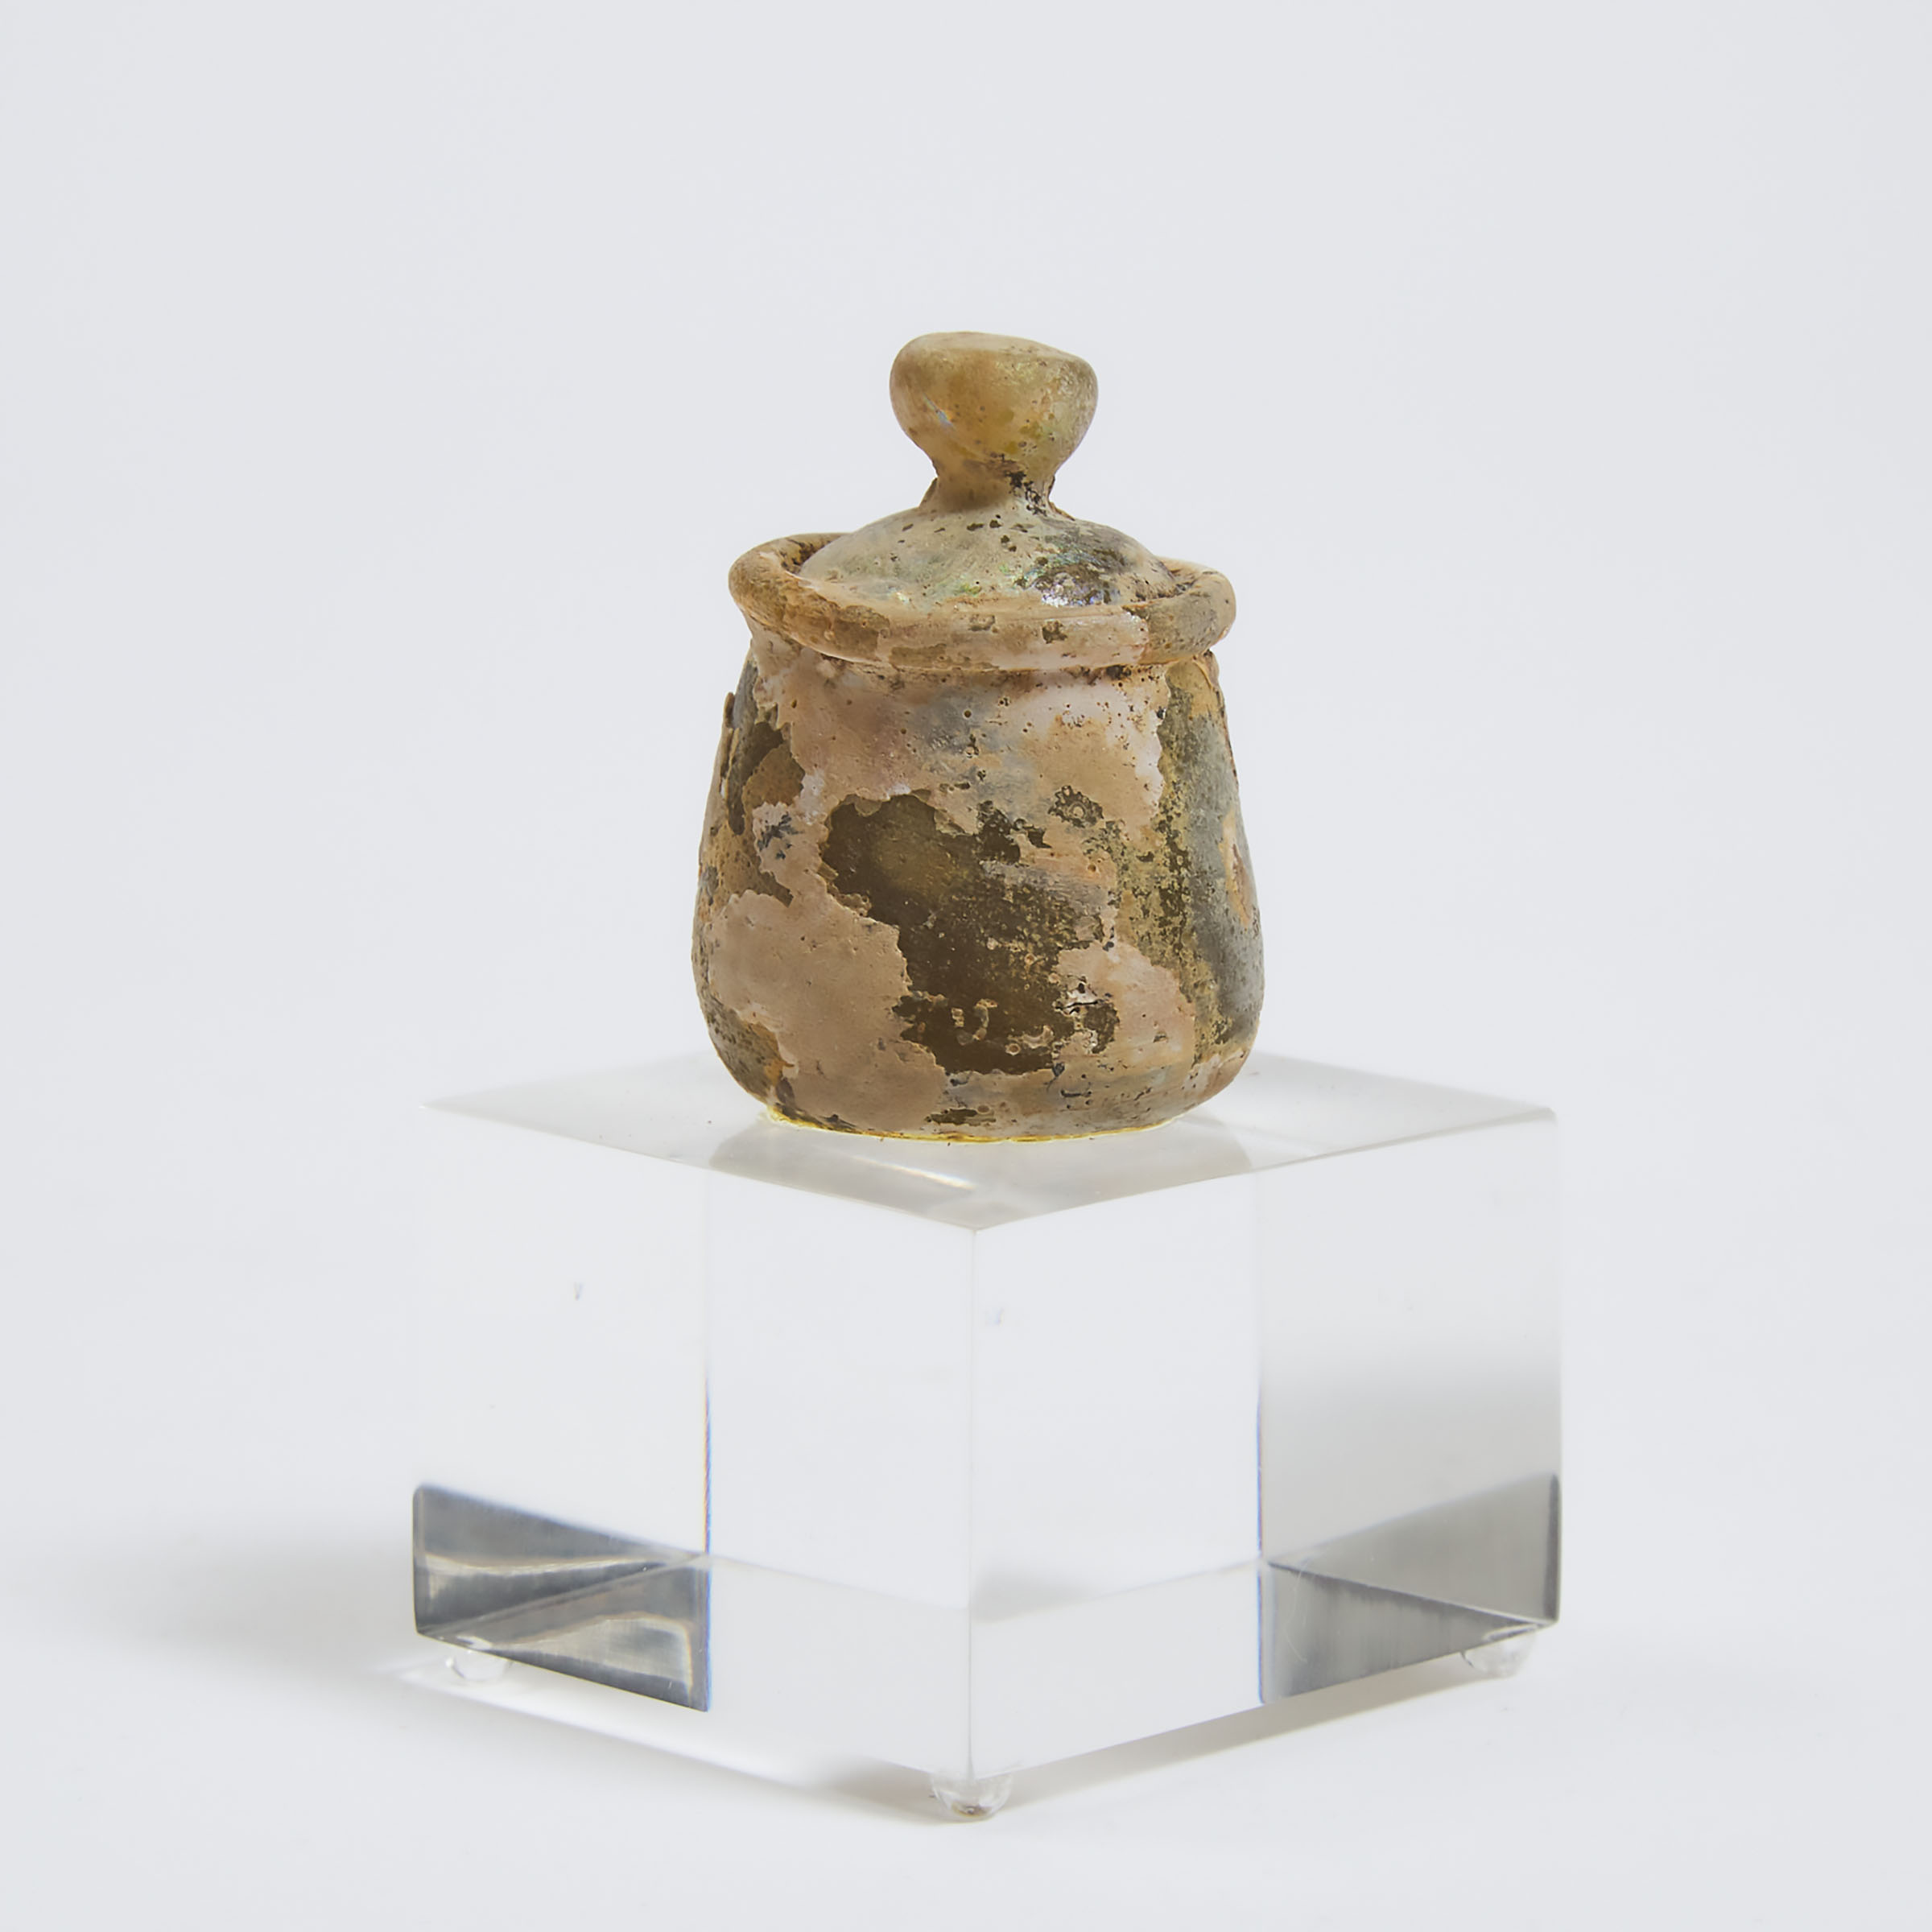 Middle Eastern Glass Covered Cosmetic Jar, 2nd-3rd century AD